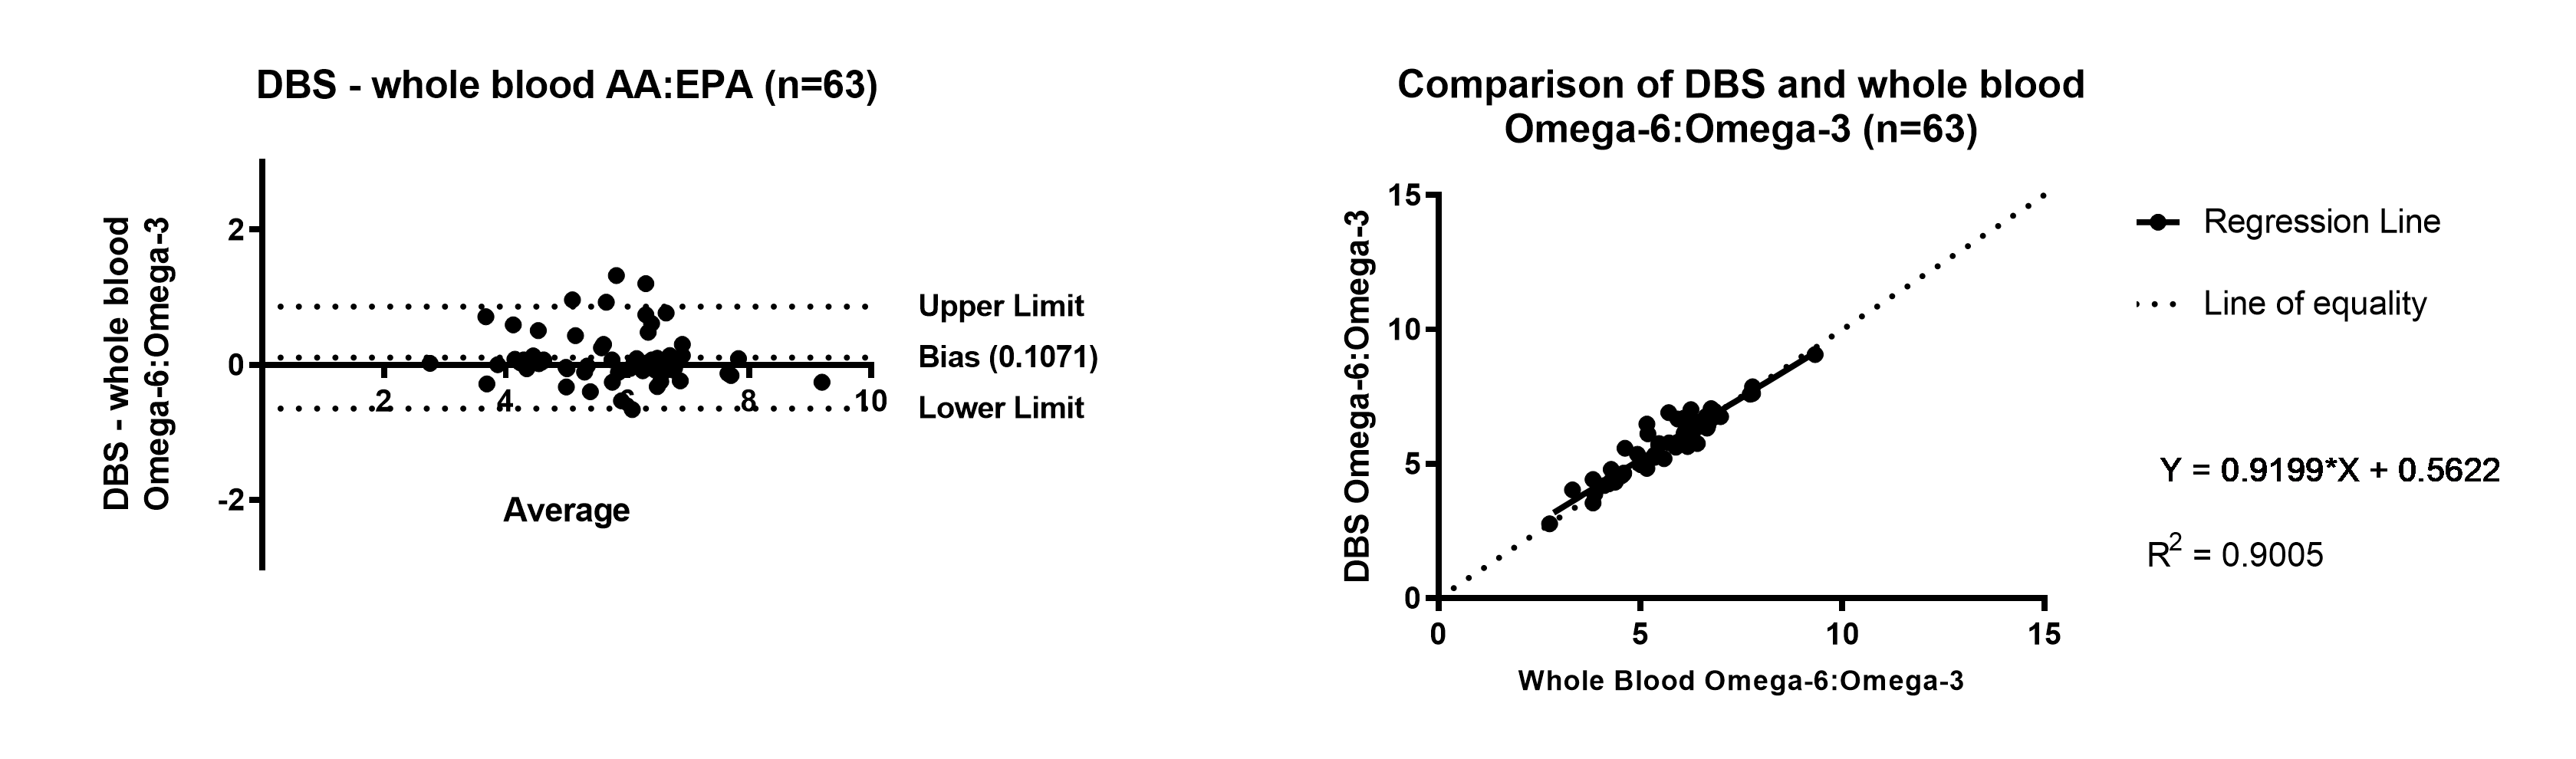 Graph showing Omega-6:Omega-3 ratio Bland Altman and Linear Regression of DBS compared to whole blood